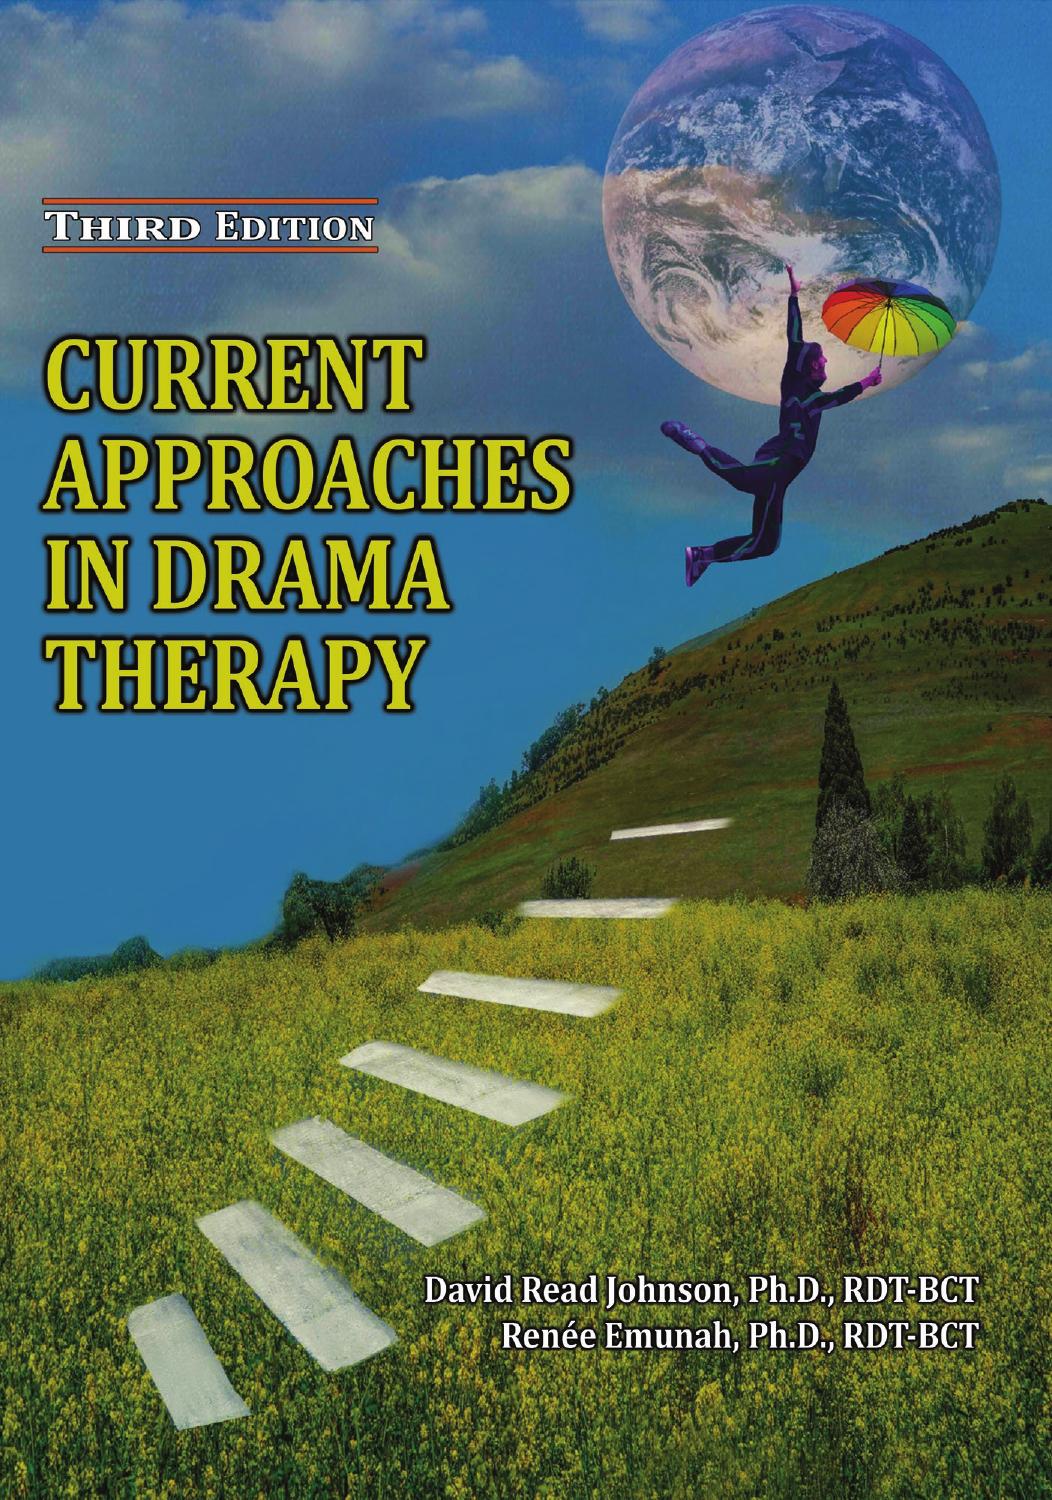 Current Approaches in Drama Therapy 3rd Edition by David Read Johnson 